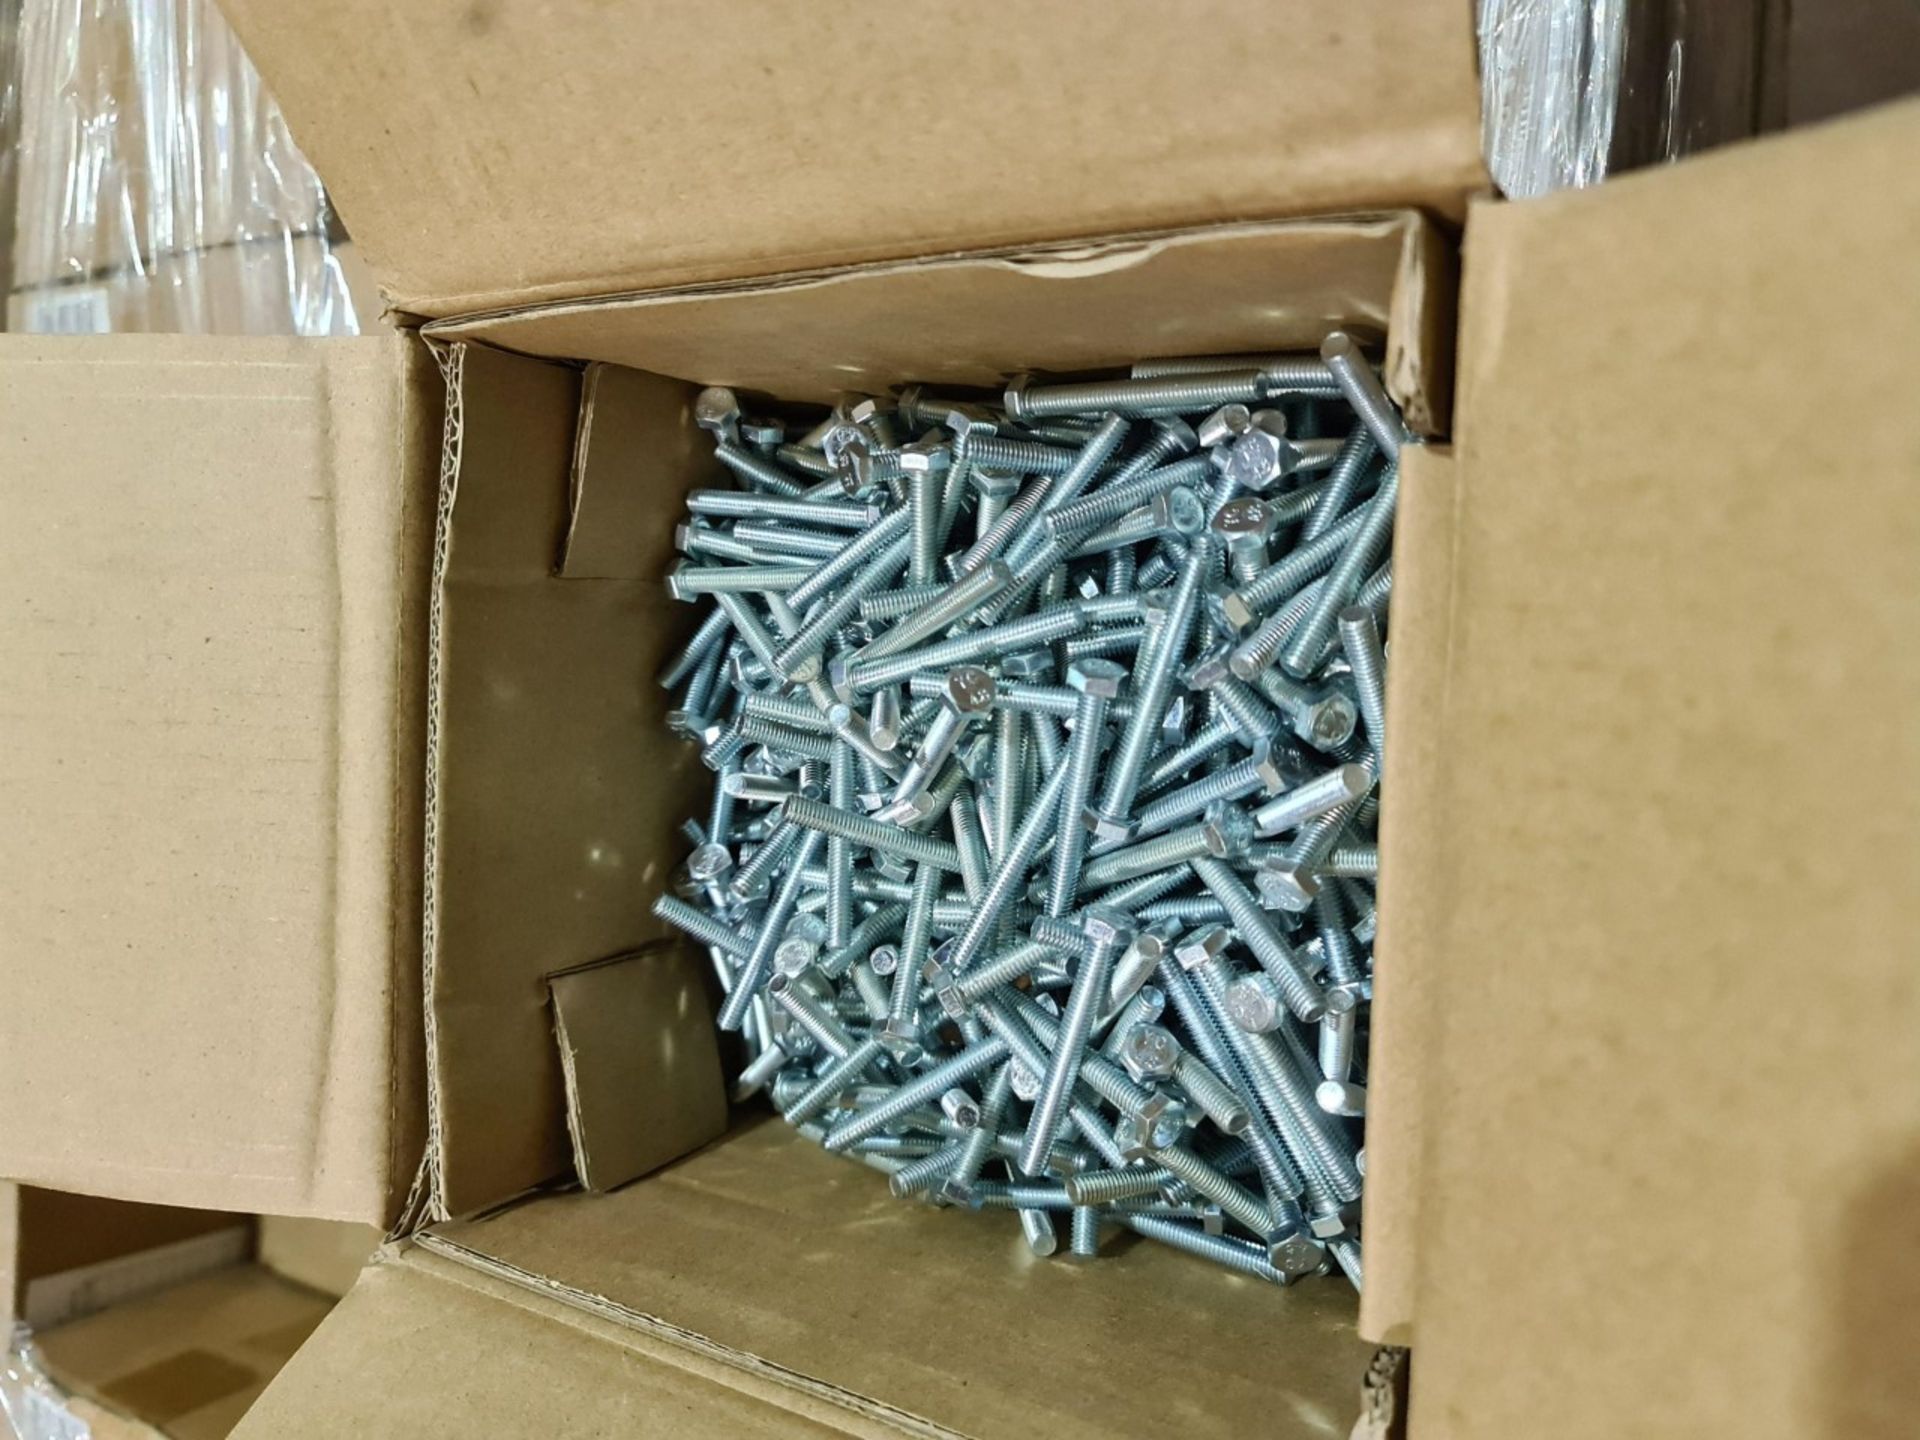 (S9) PALLET TO CONTAIN 200 x NEW 4KG BOXES OF M6x50MM HEX BOLT. ZP. RRP £24.25 PER BOX - Image 2 of 2